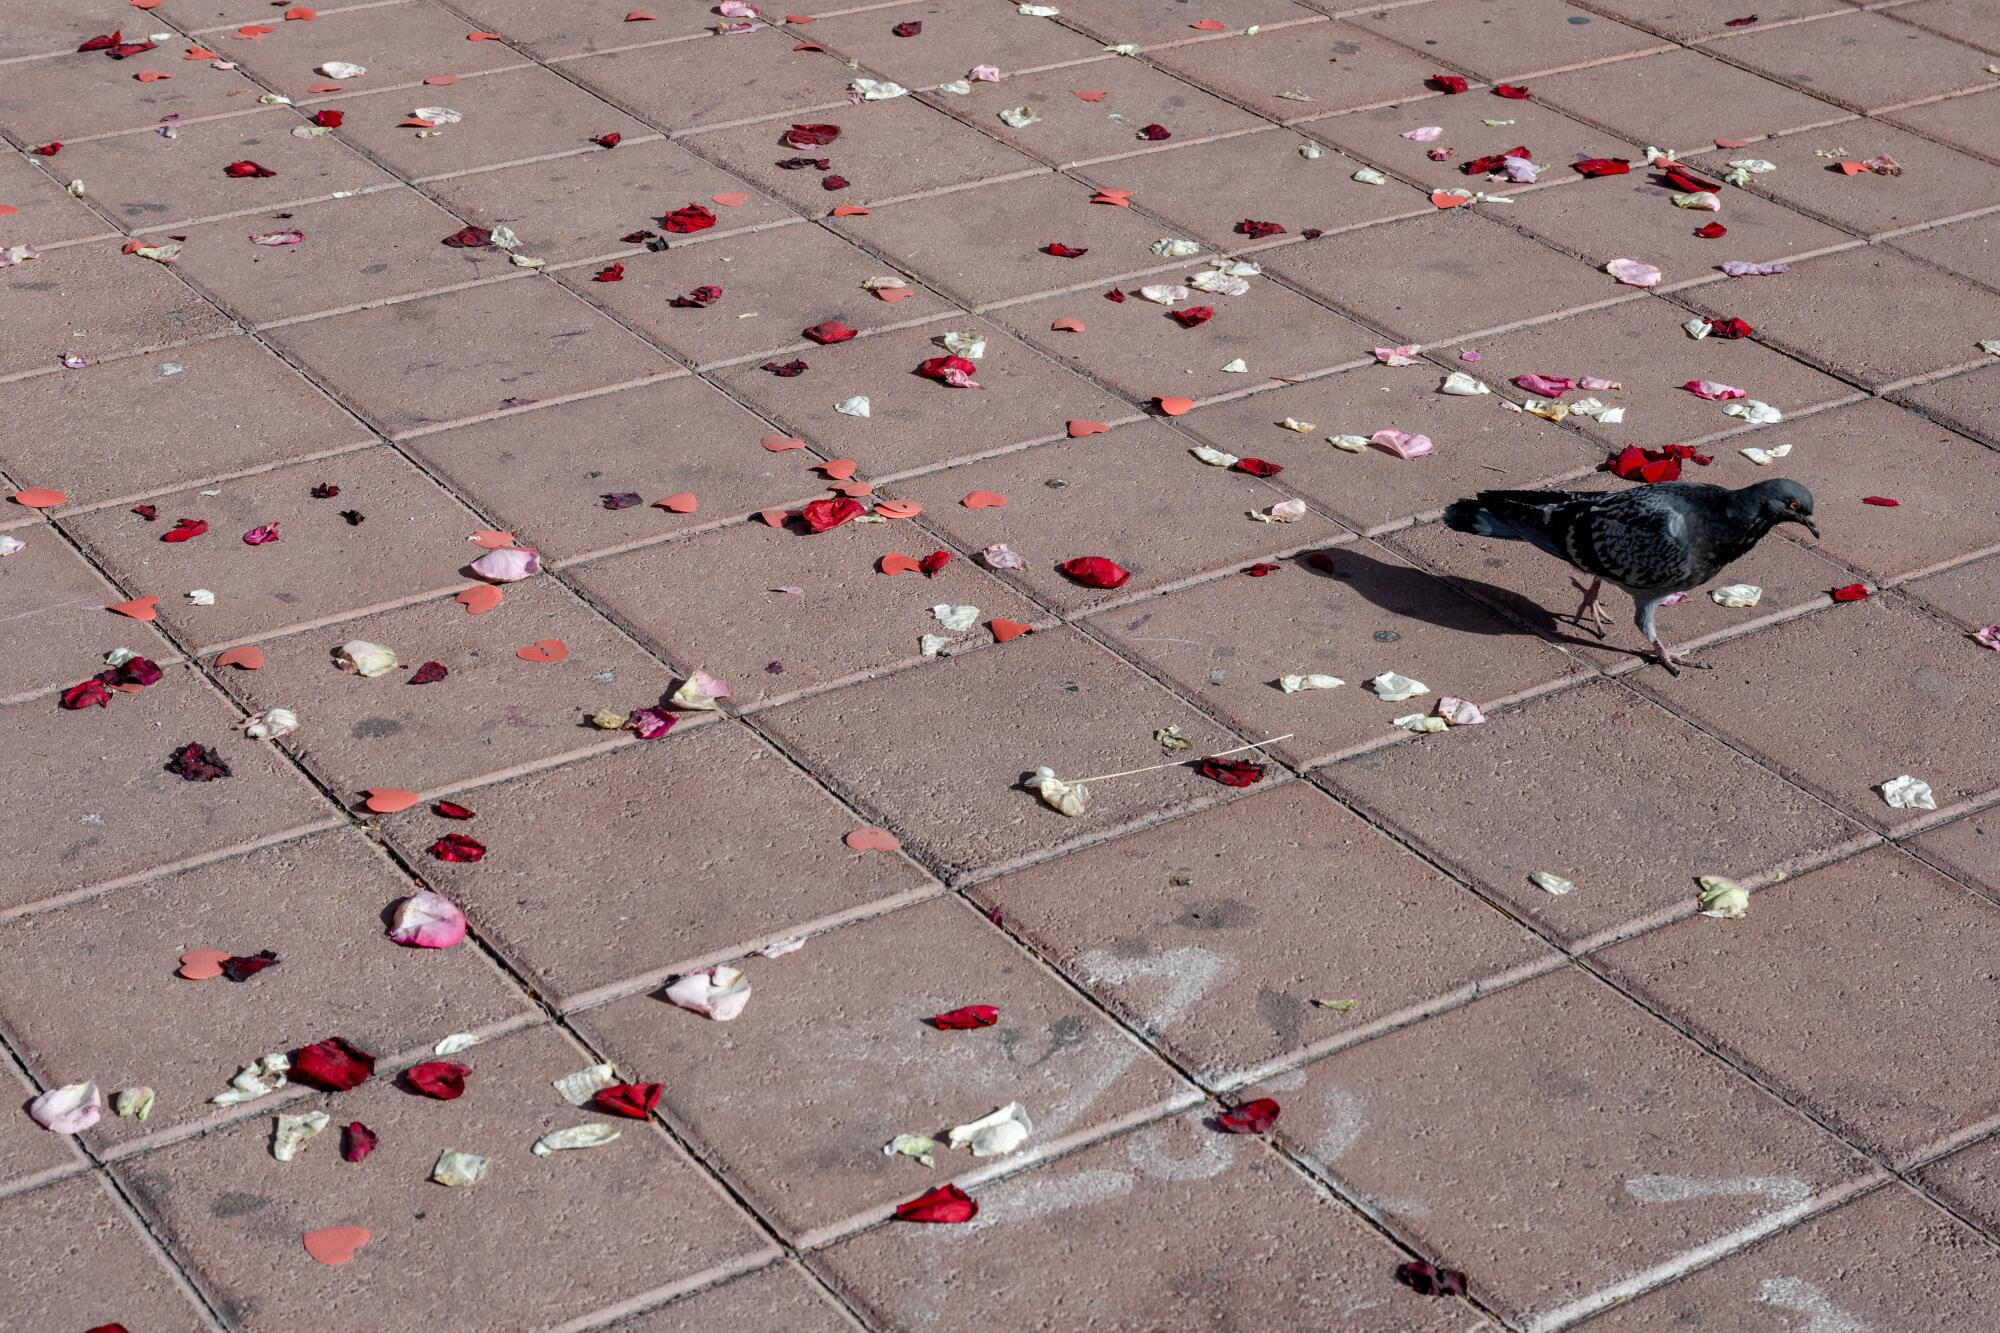 A pigeon walks amid flower petals on the ground